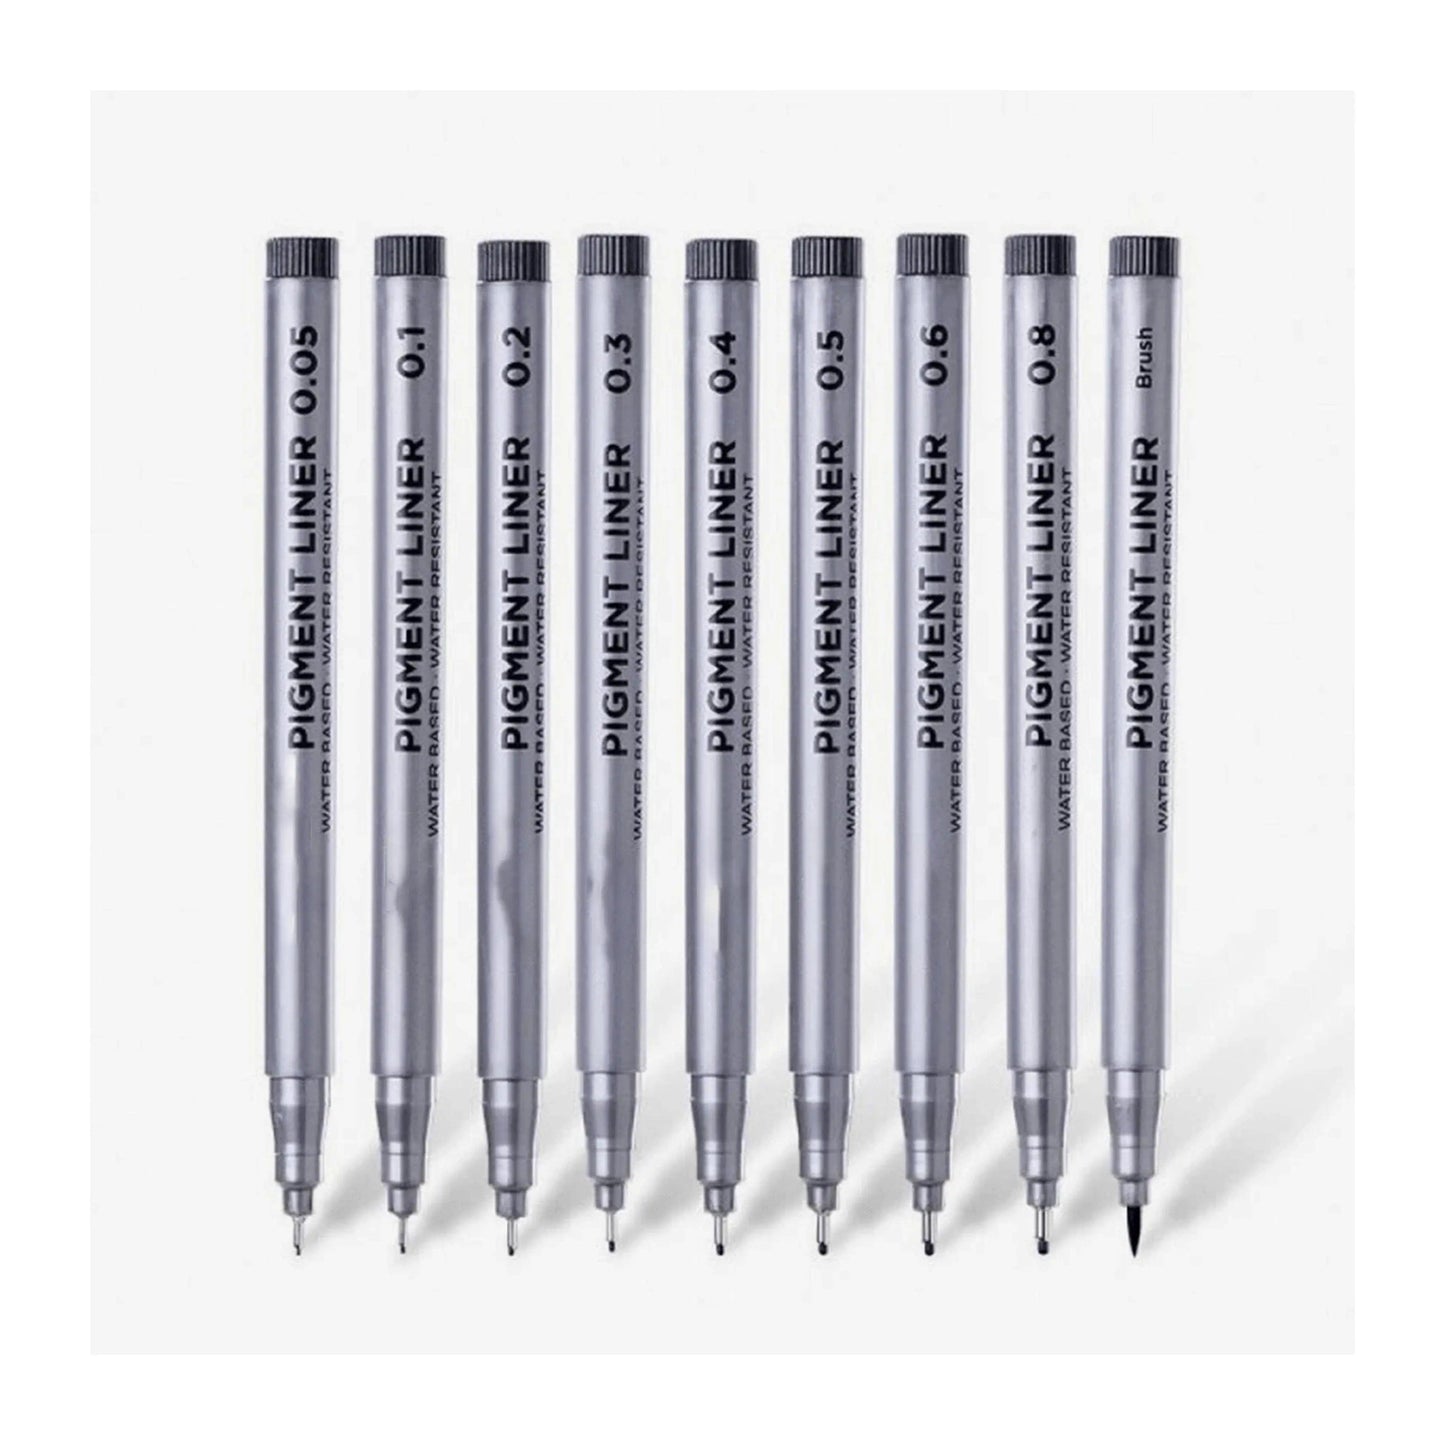 Keep Smiling Pigment liner Pack Of 9 The Stationers